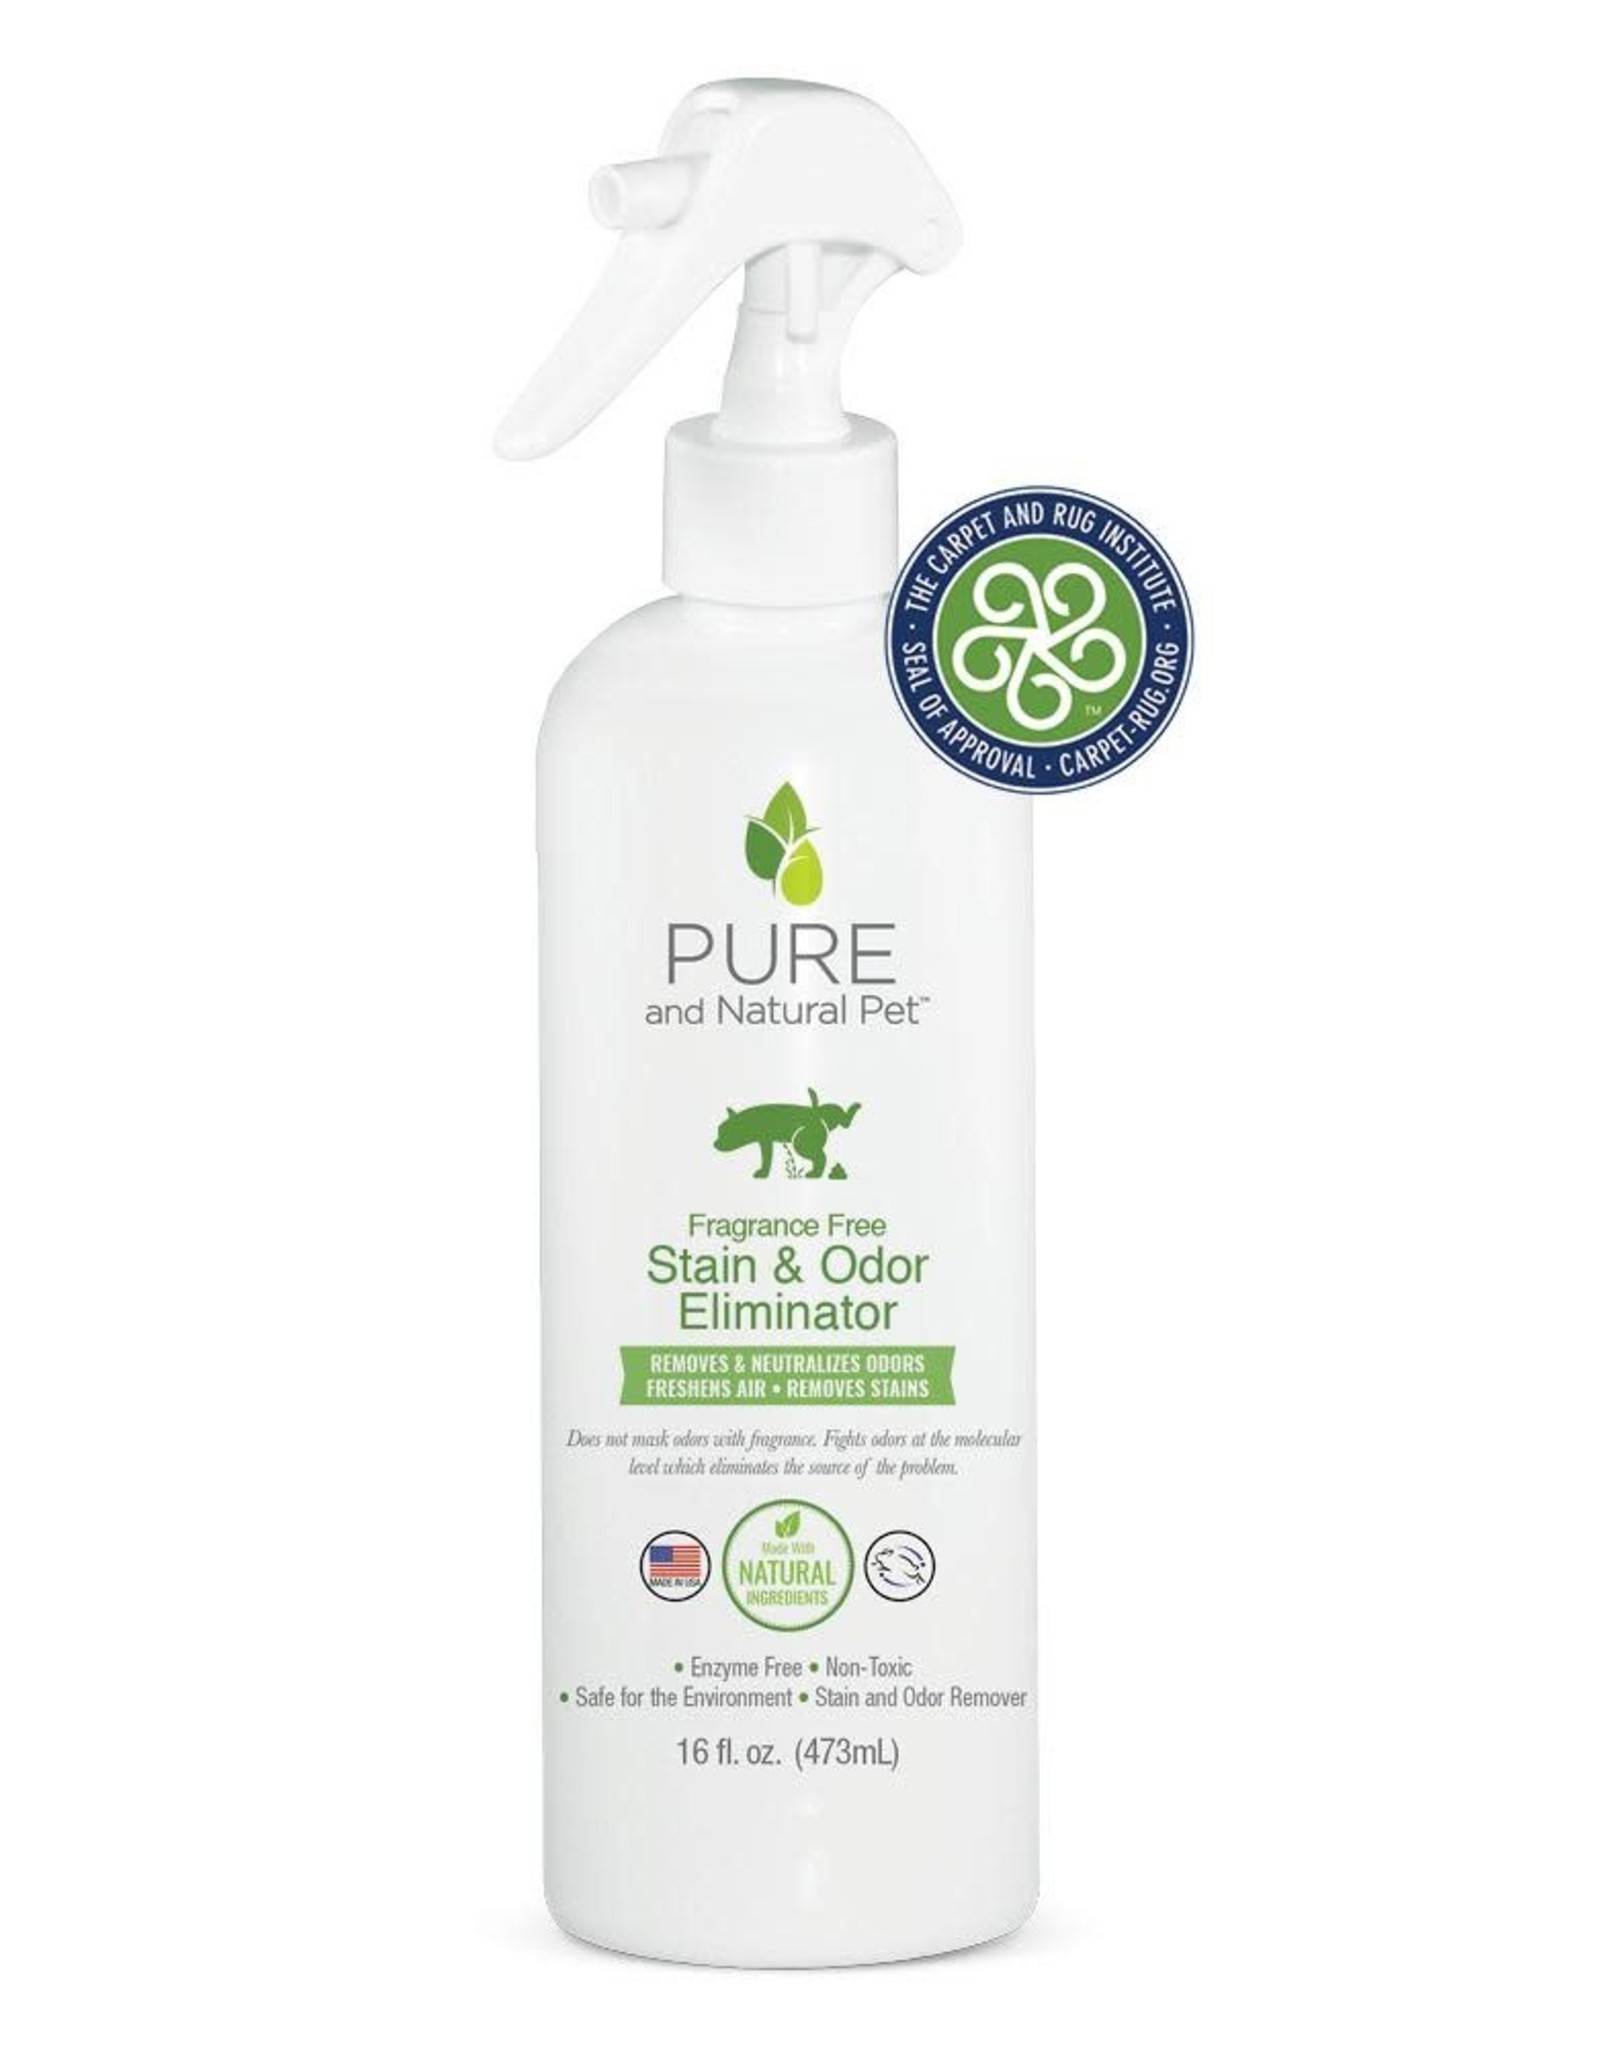 Pure and Natural Pet Stain and Odor Eliminator